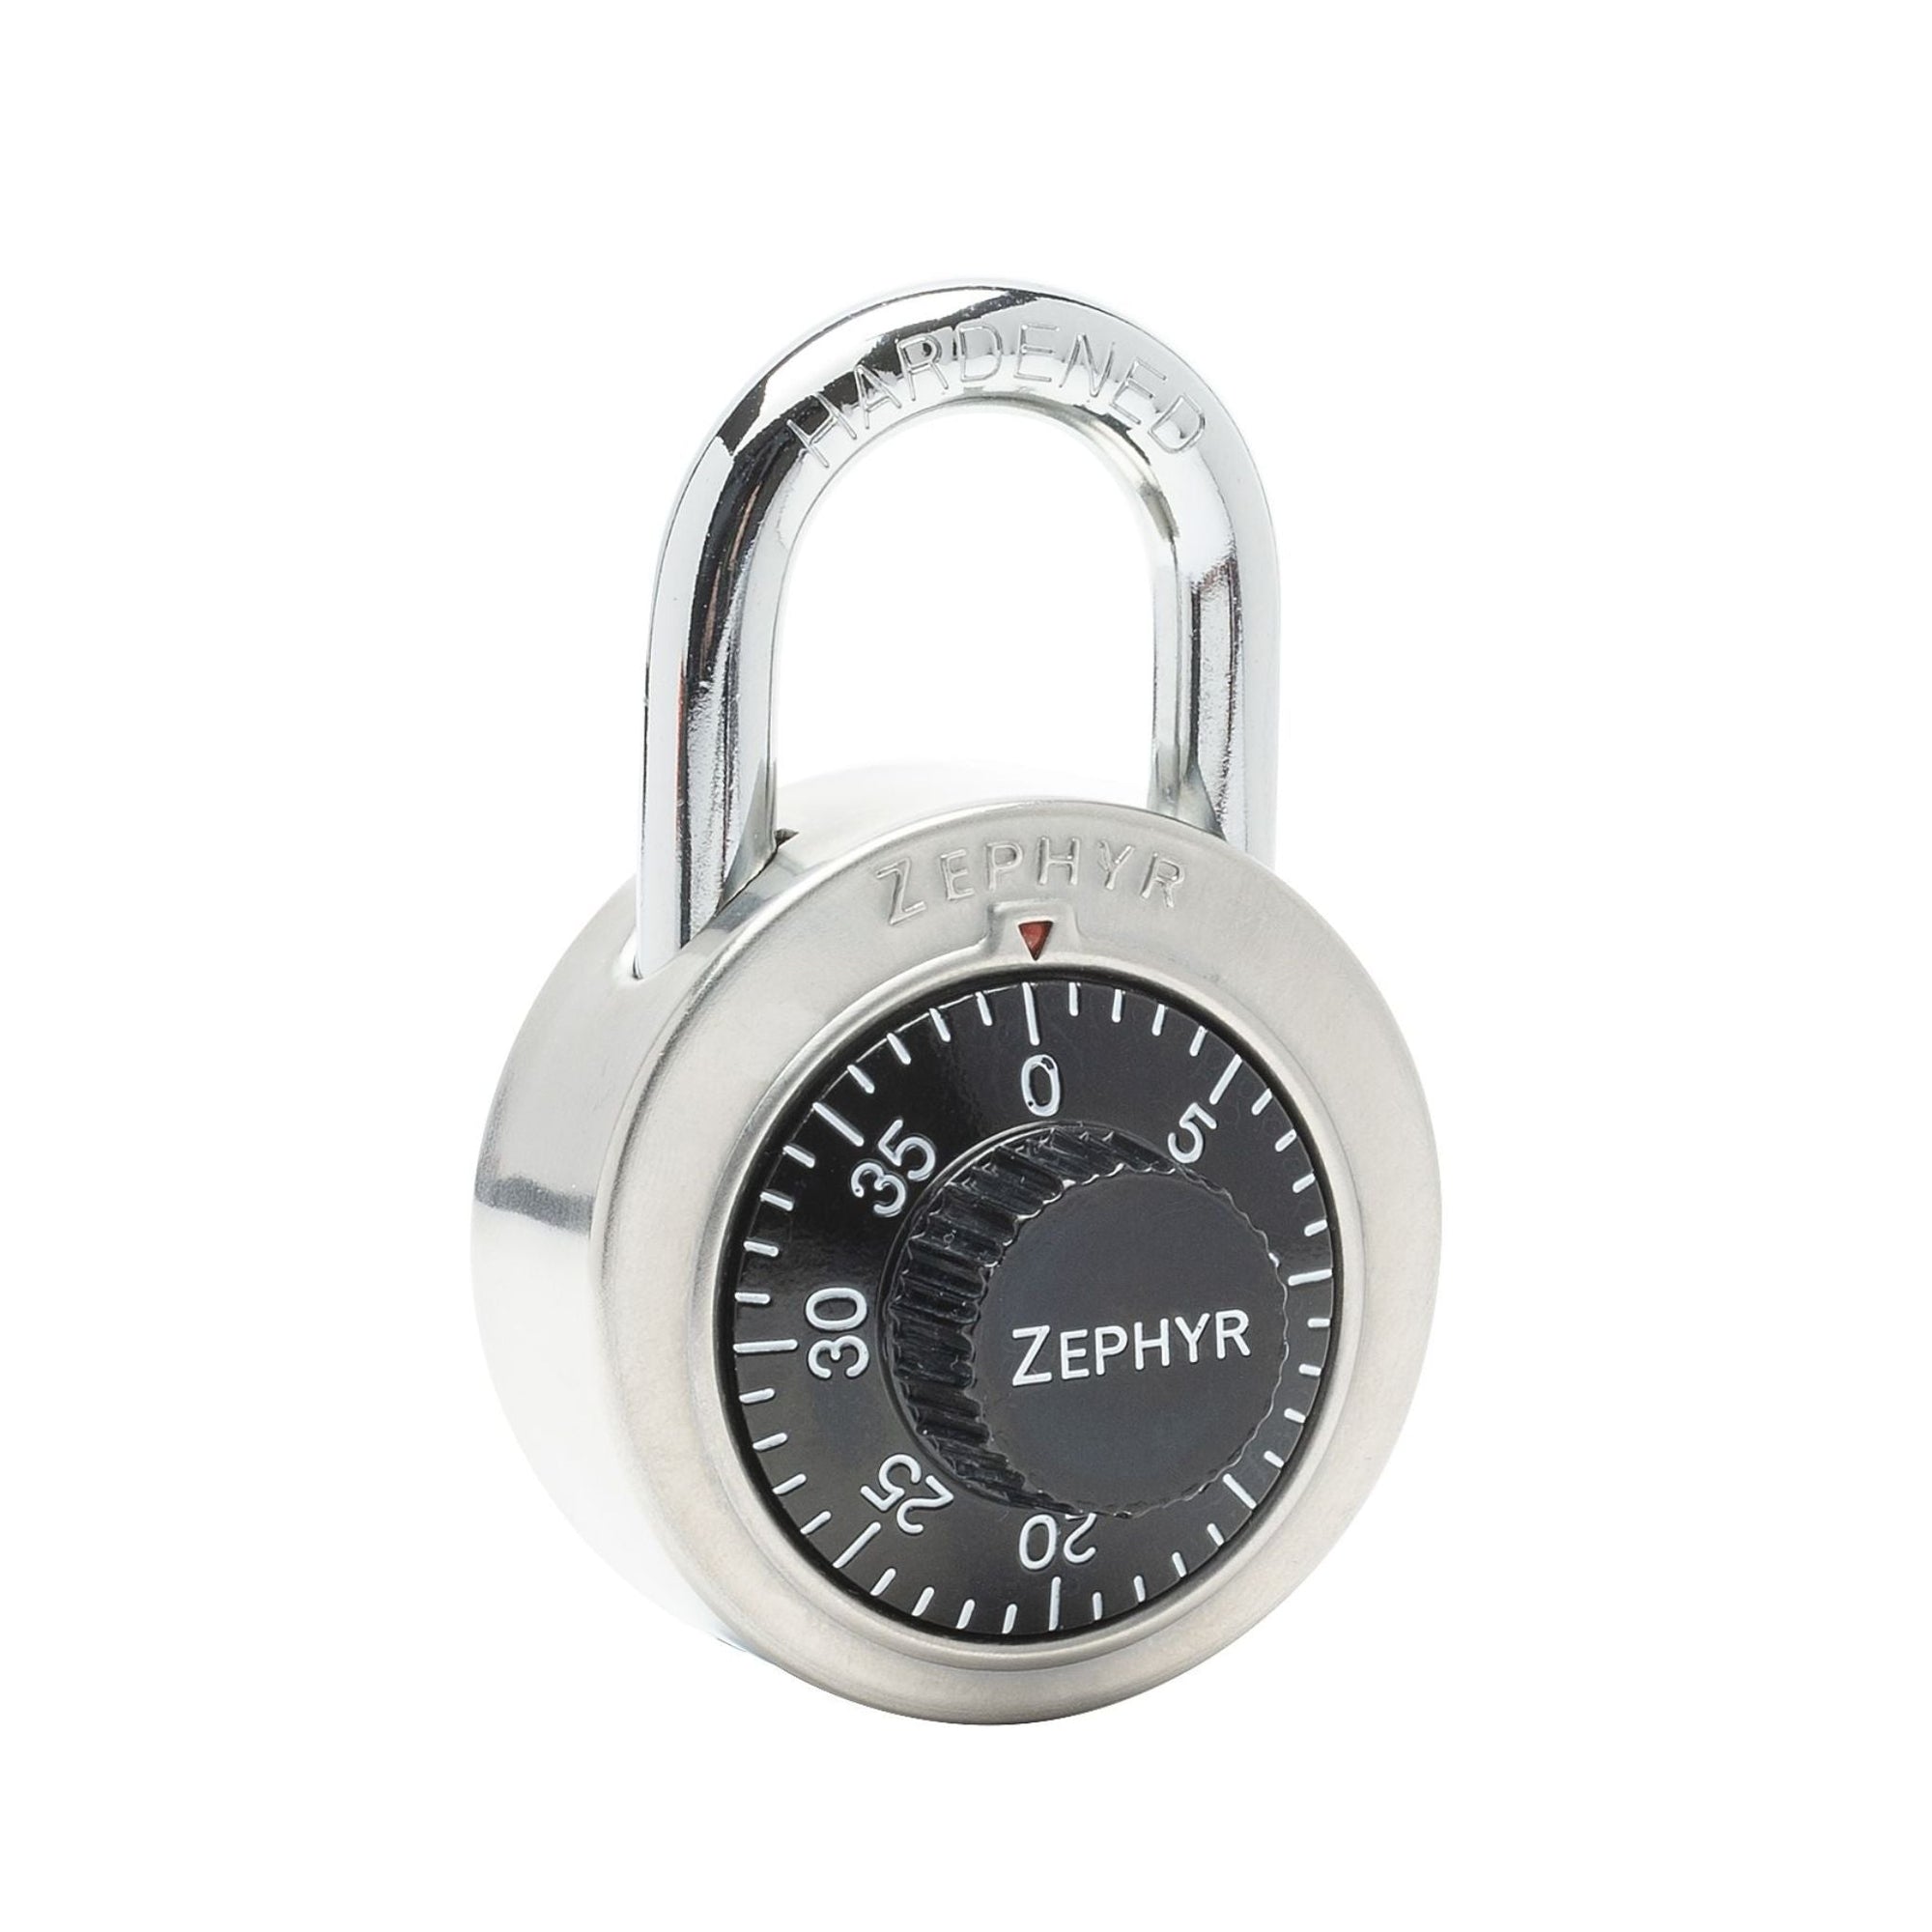 Zephyr Lock 1902 Combination Padlock with Anti-Shim Feature and Stainless Steel Lock Body - The Lock Source